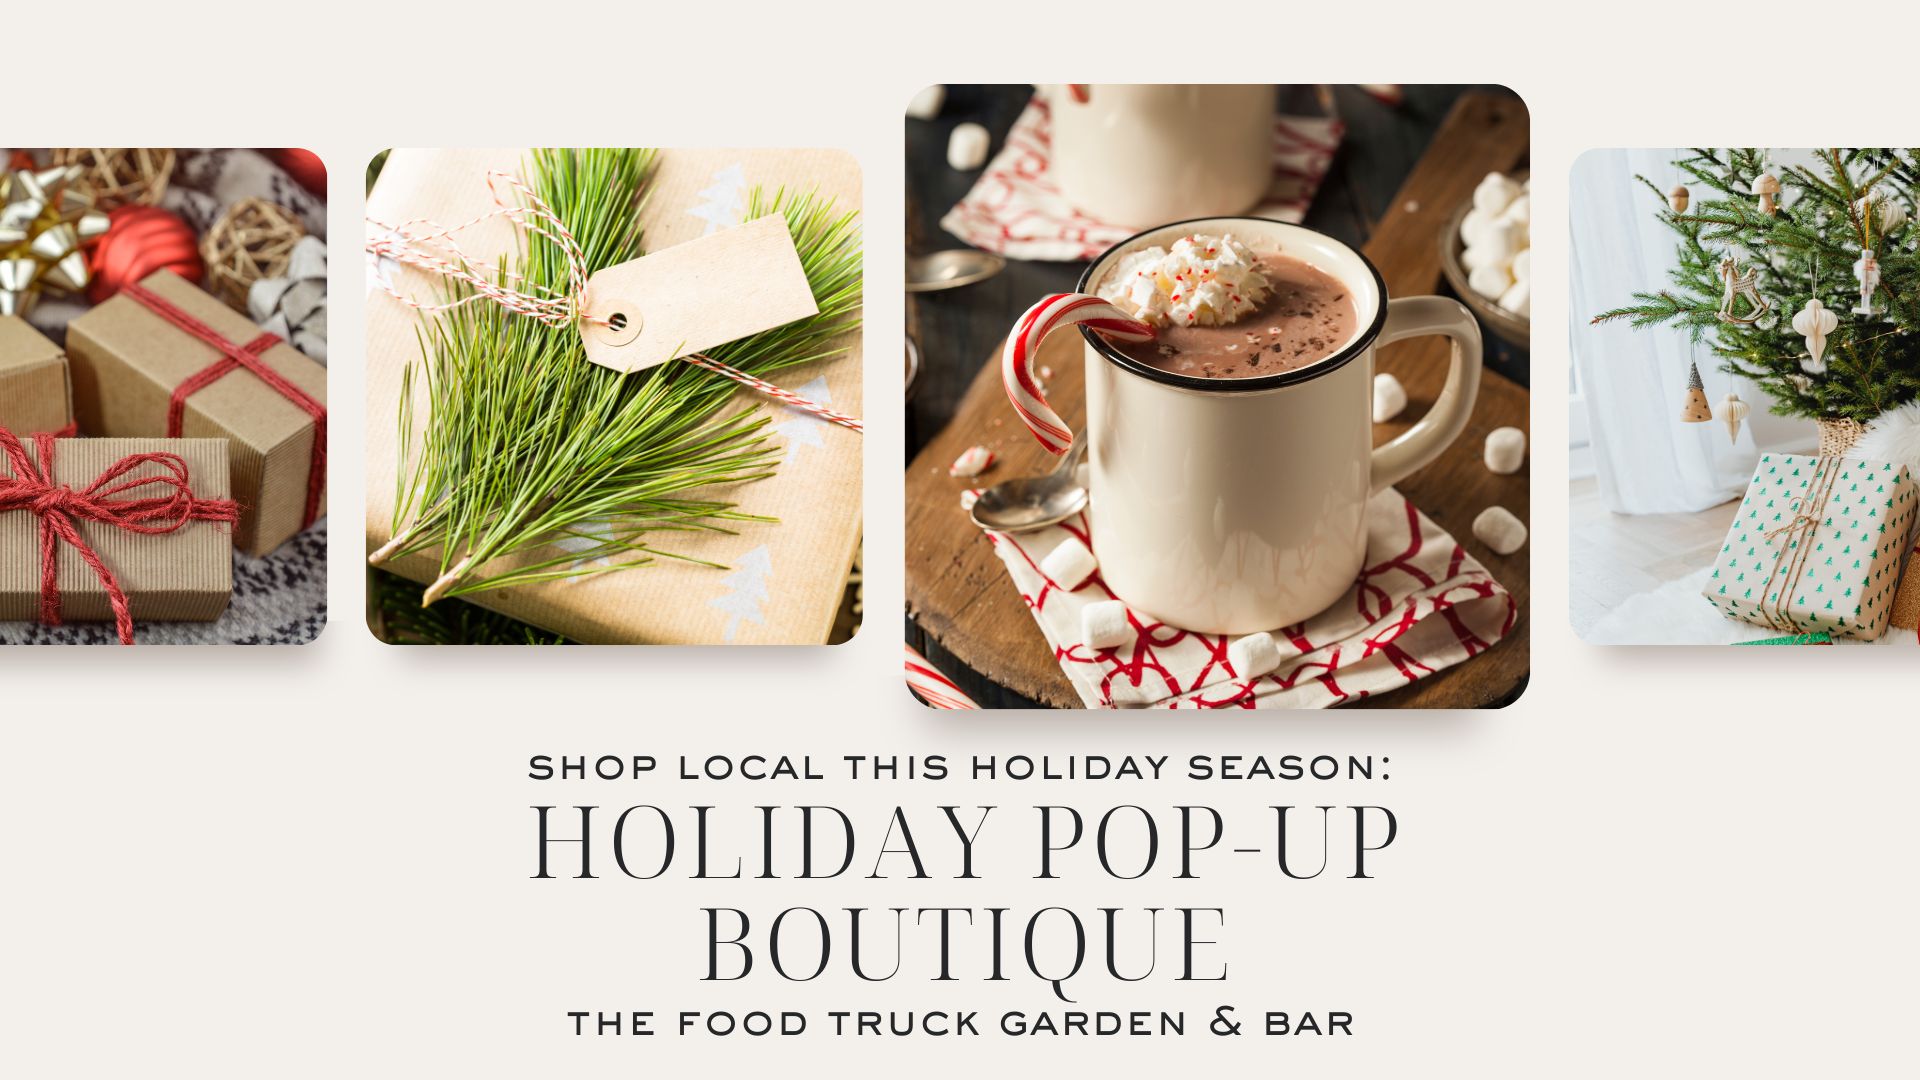 Holiday Pop-Up Boutique at Healing Green Farms